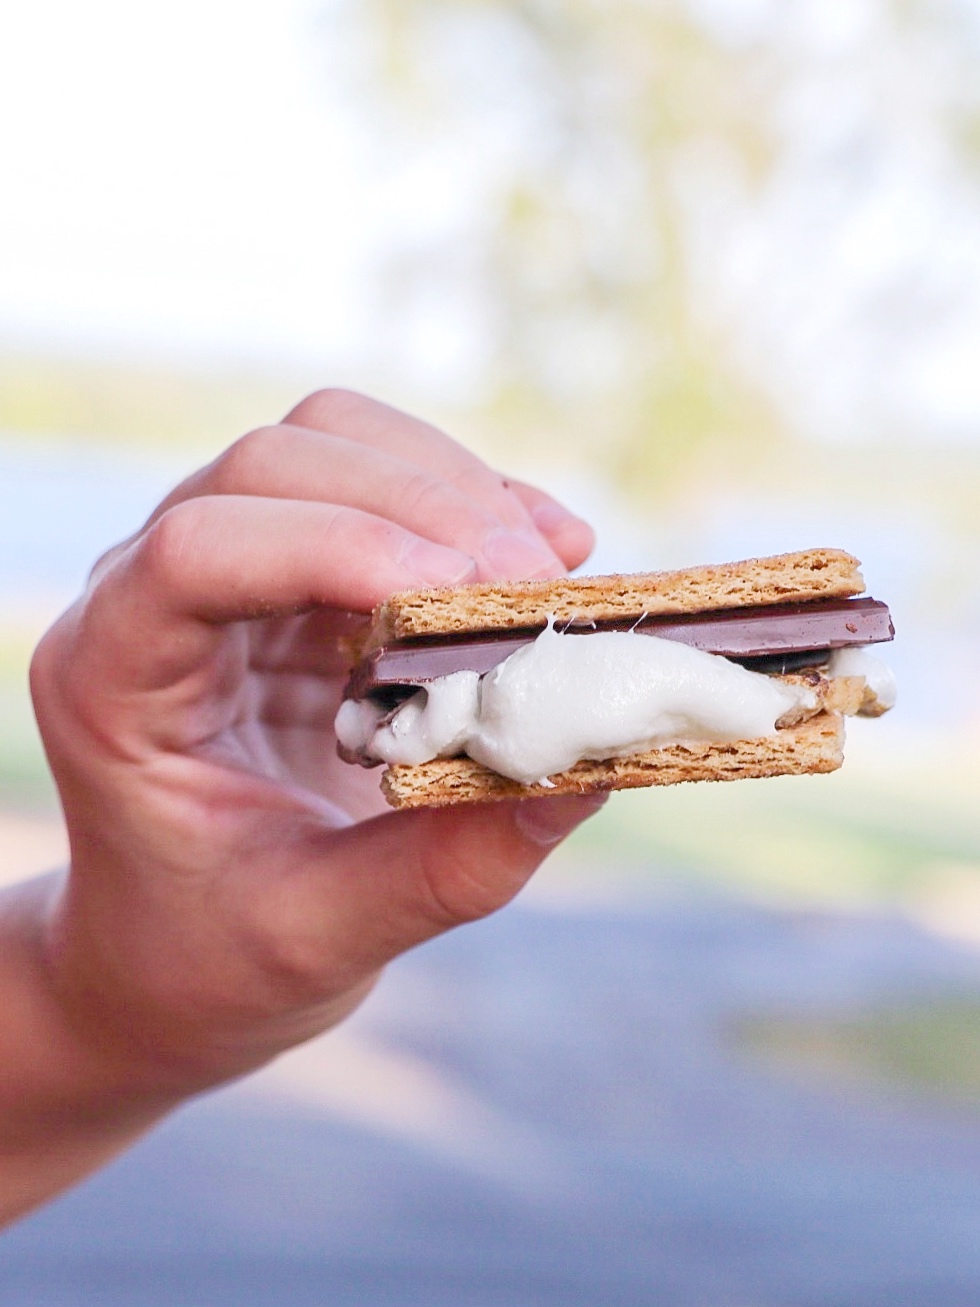 Easy alternative s'mores ideas: Change up the chocolate bar